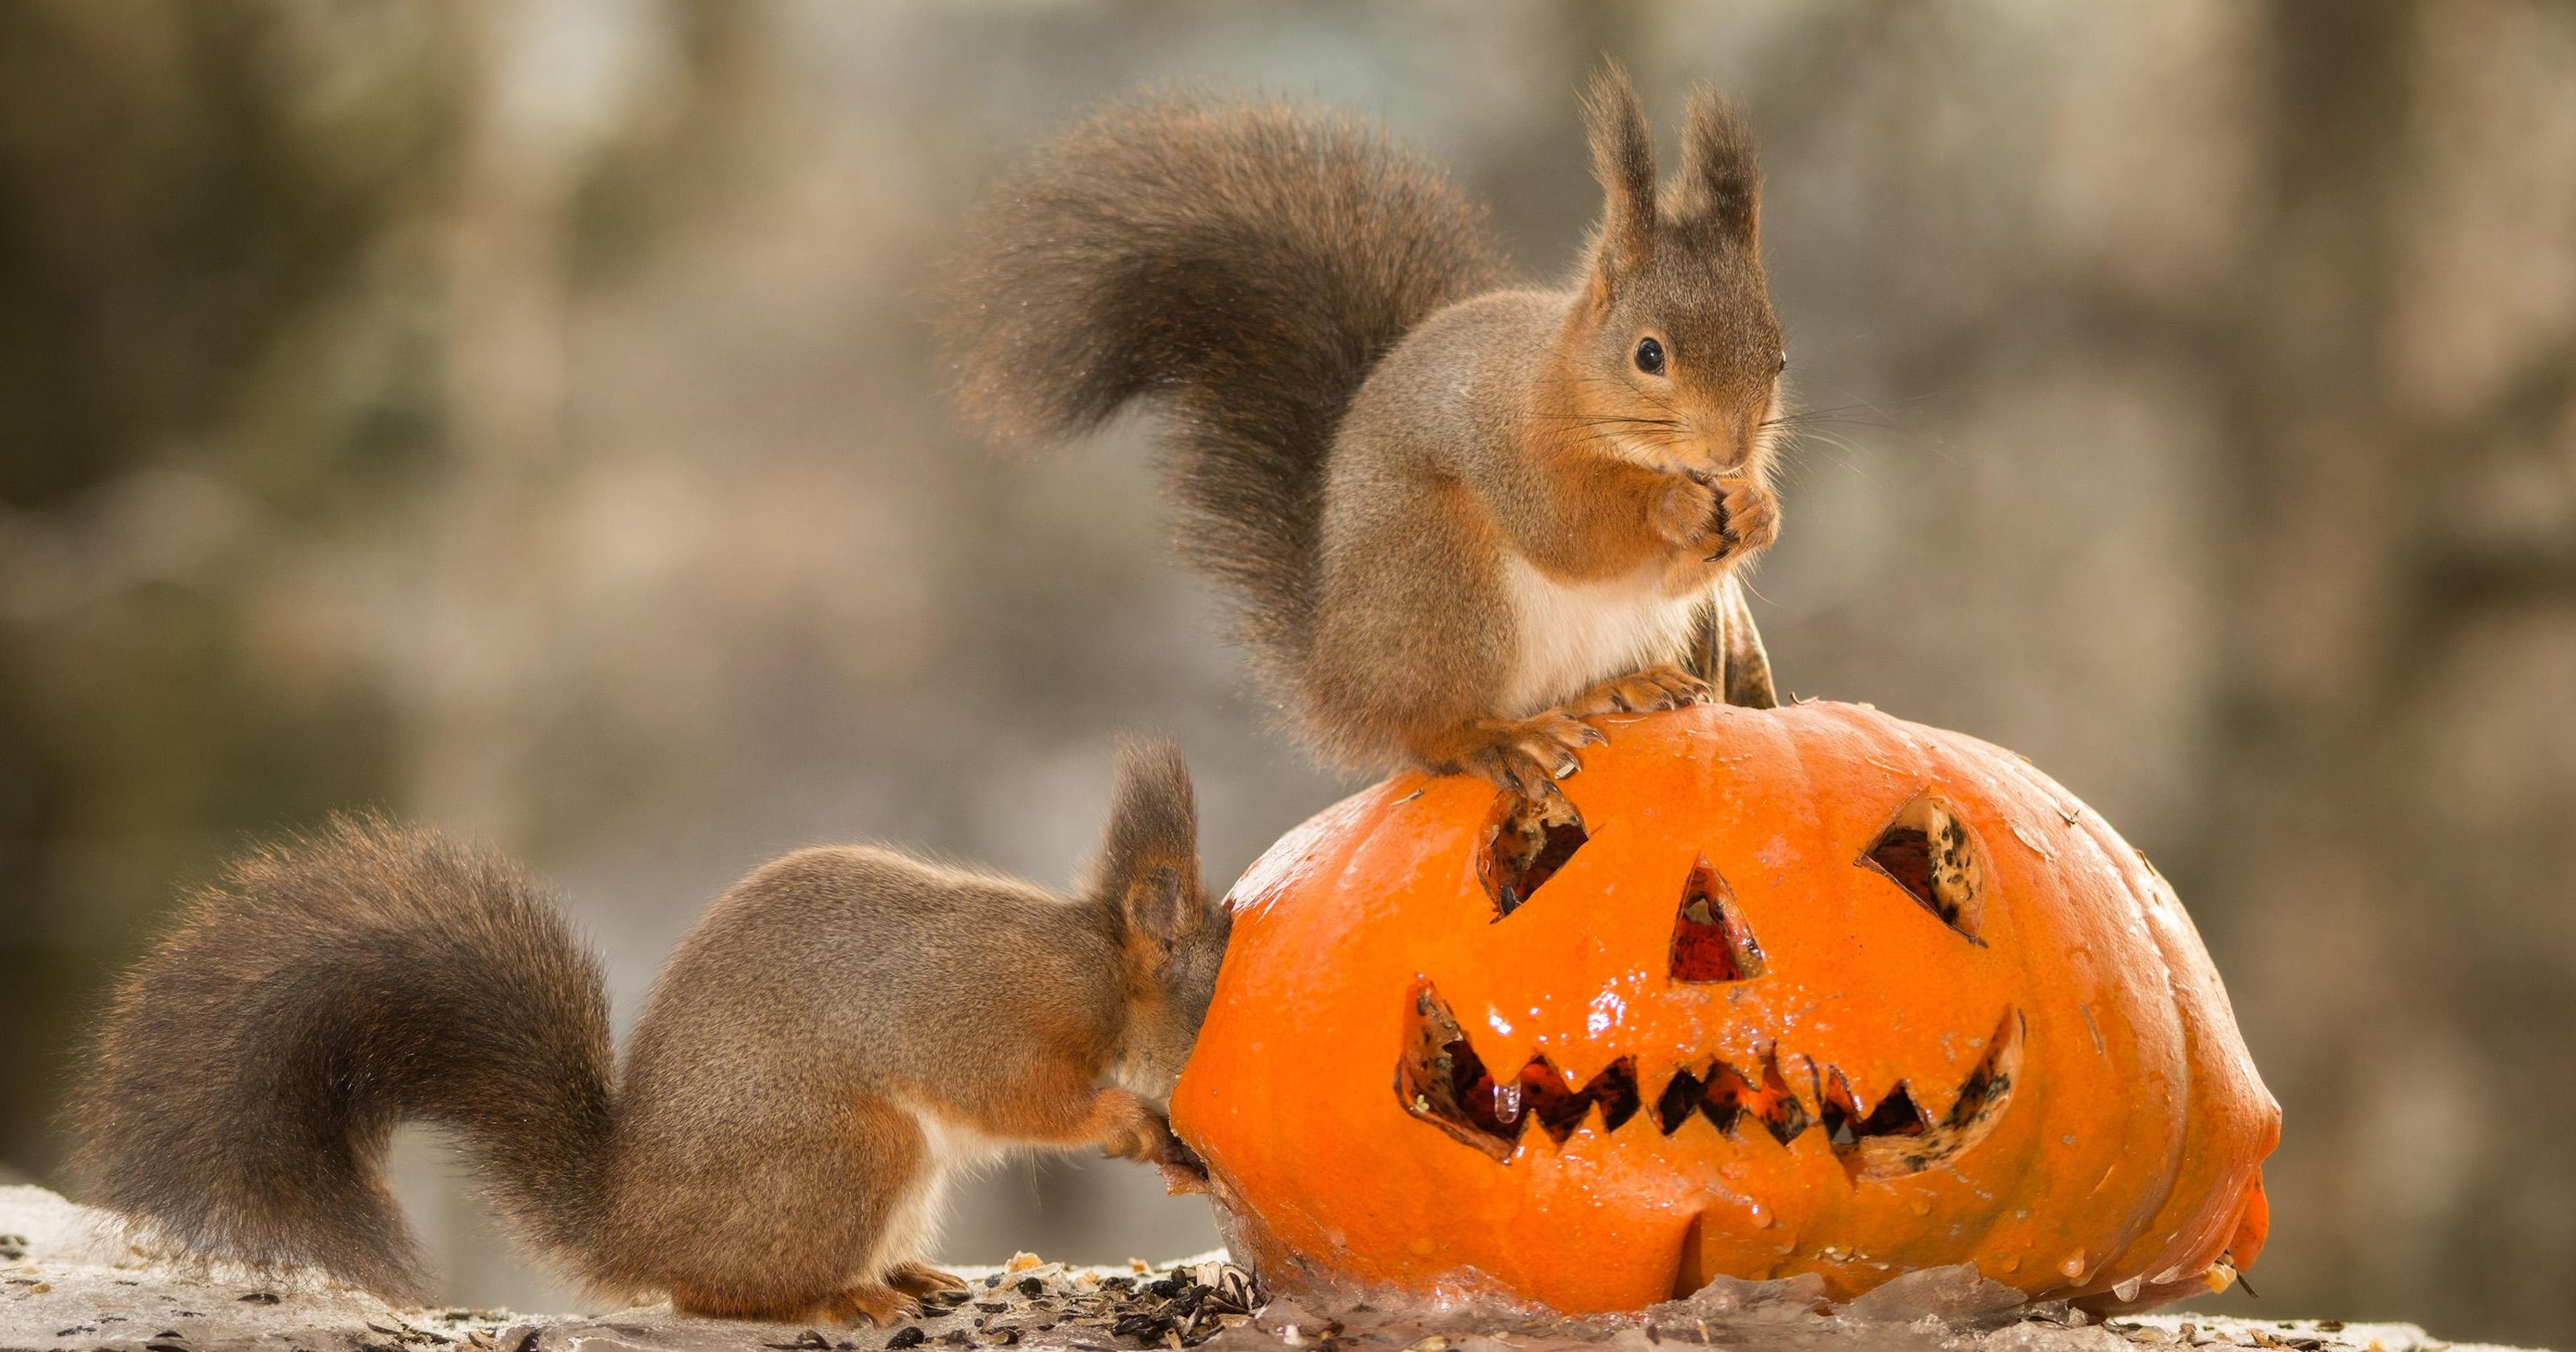 Tips to keep squirrels from eating your pumpkins